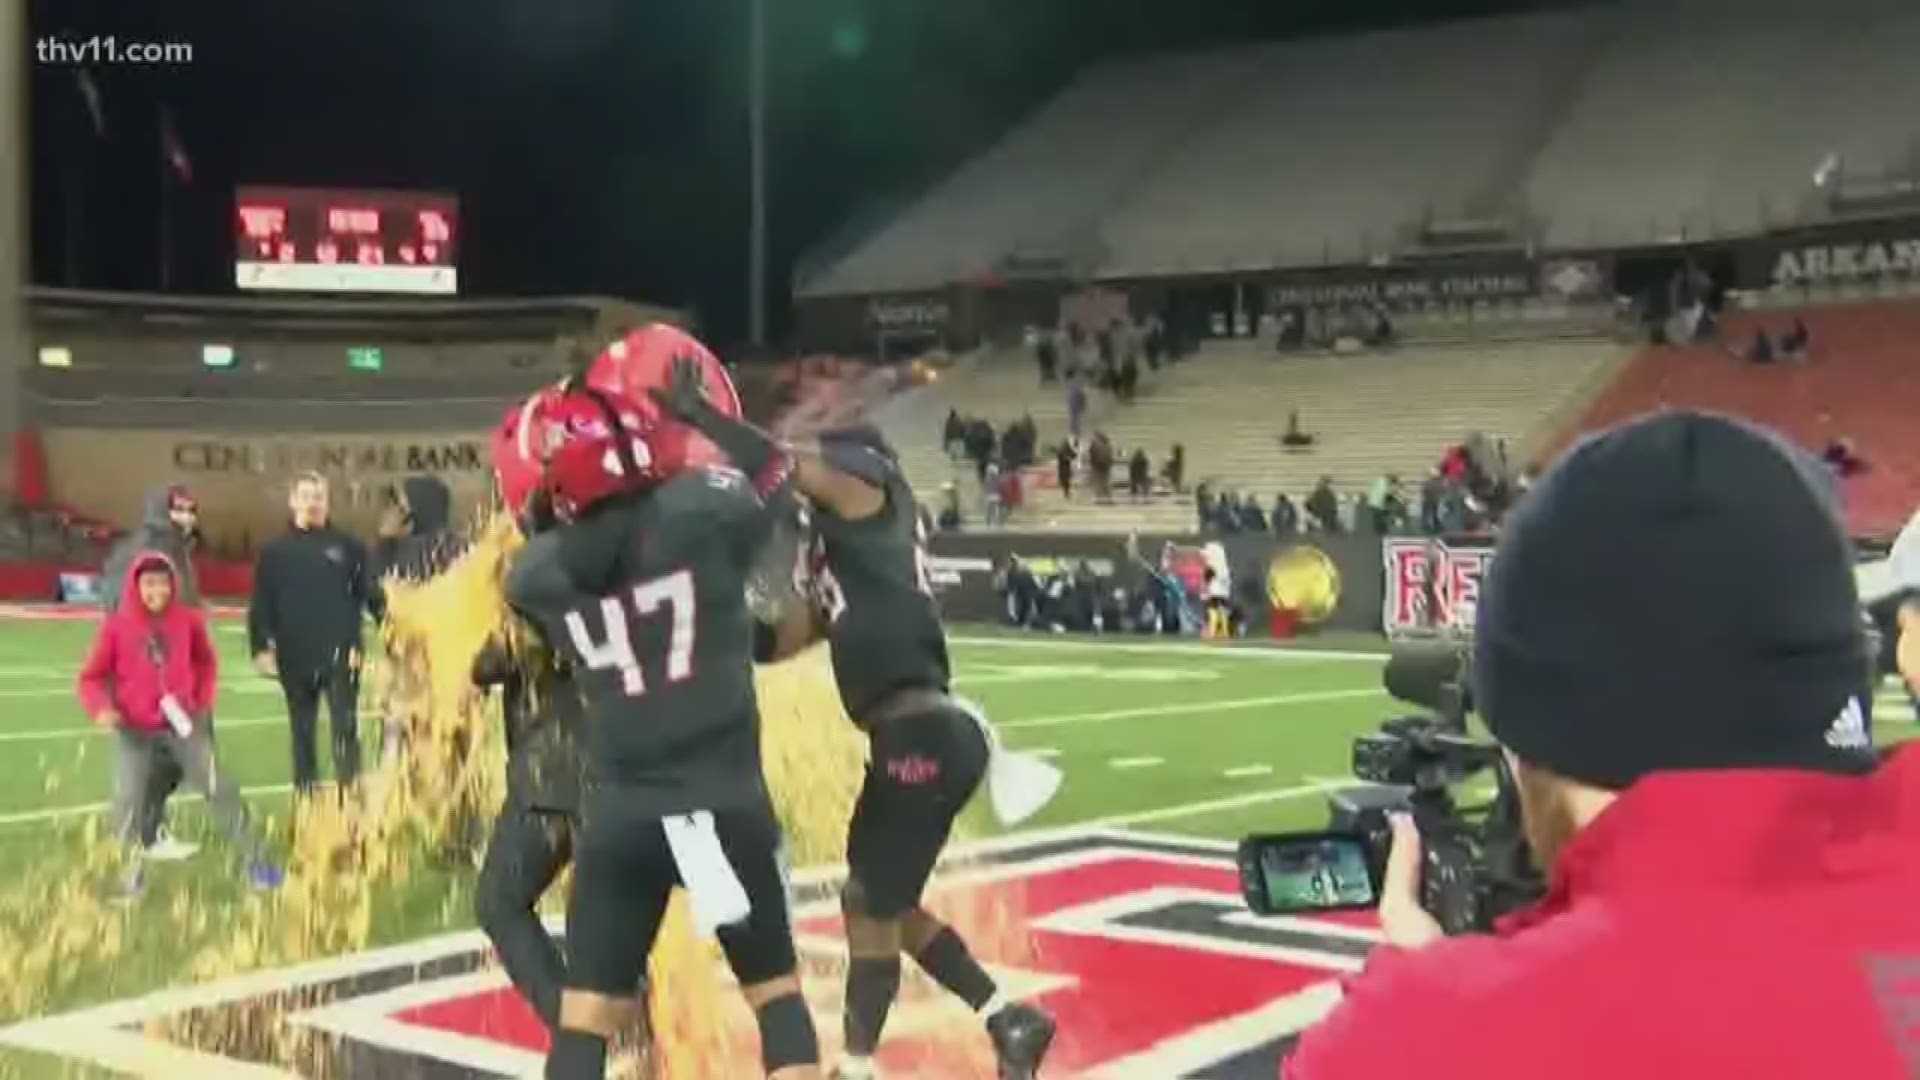 A-State hangs on to beat Georgia Southern 38-33